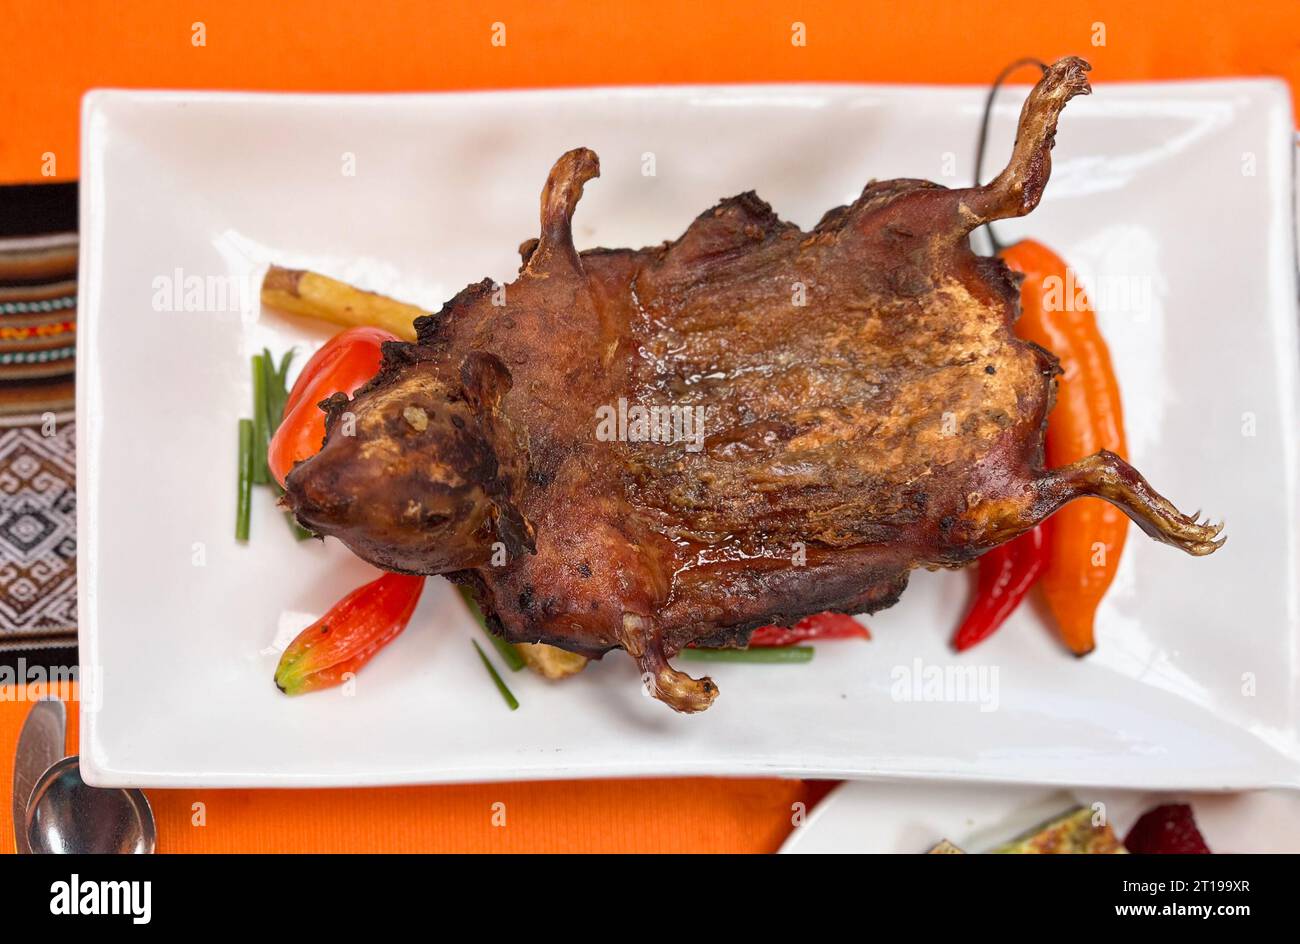 Traditional Peruvian roasted cuy (guinea pig) with vegetables Stock Photo